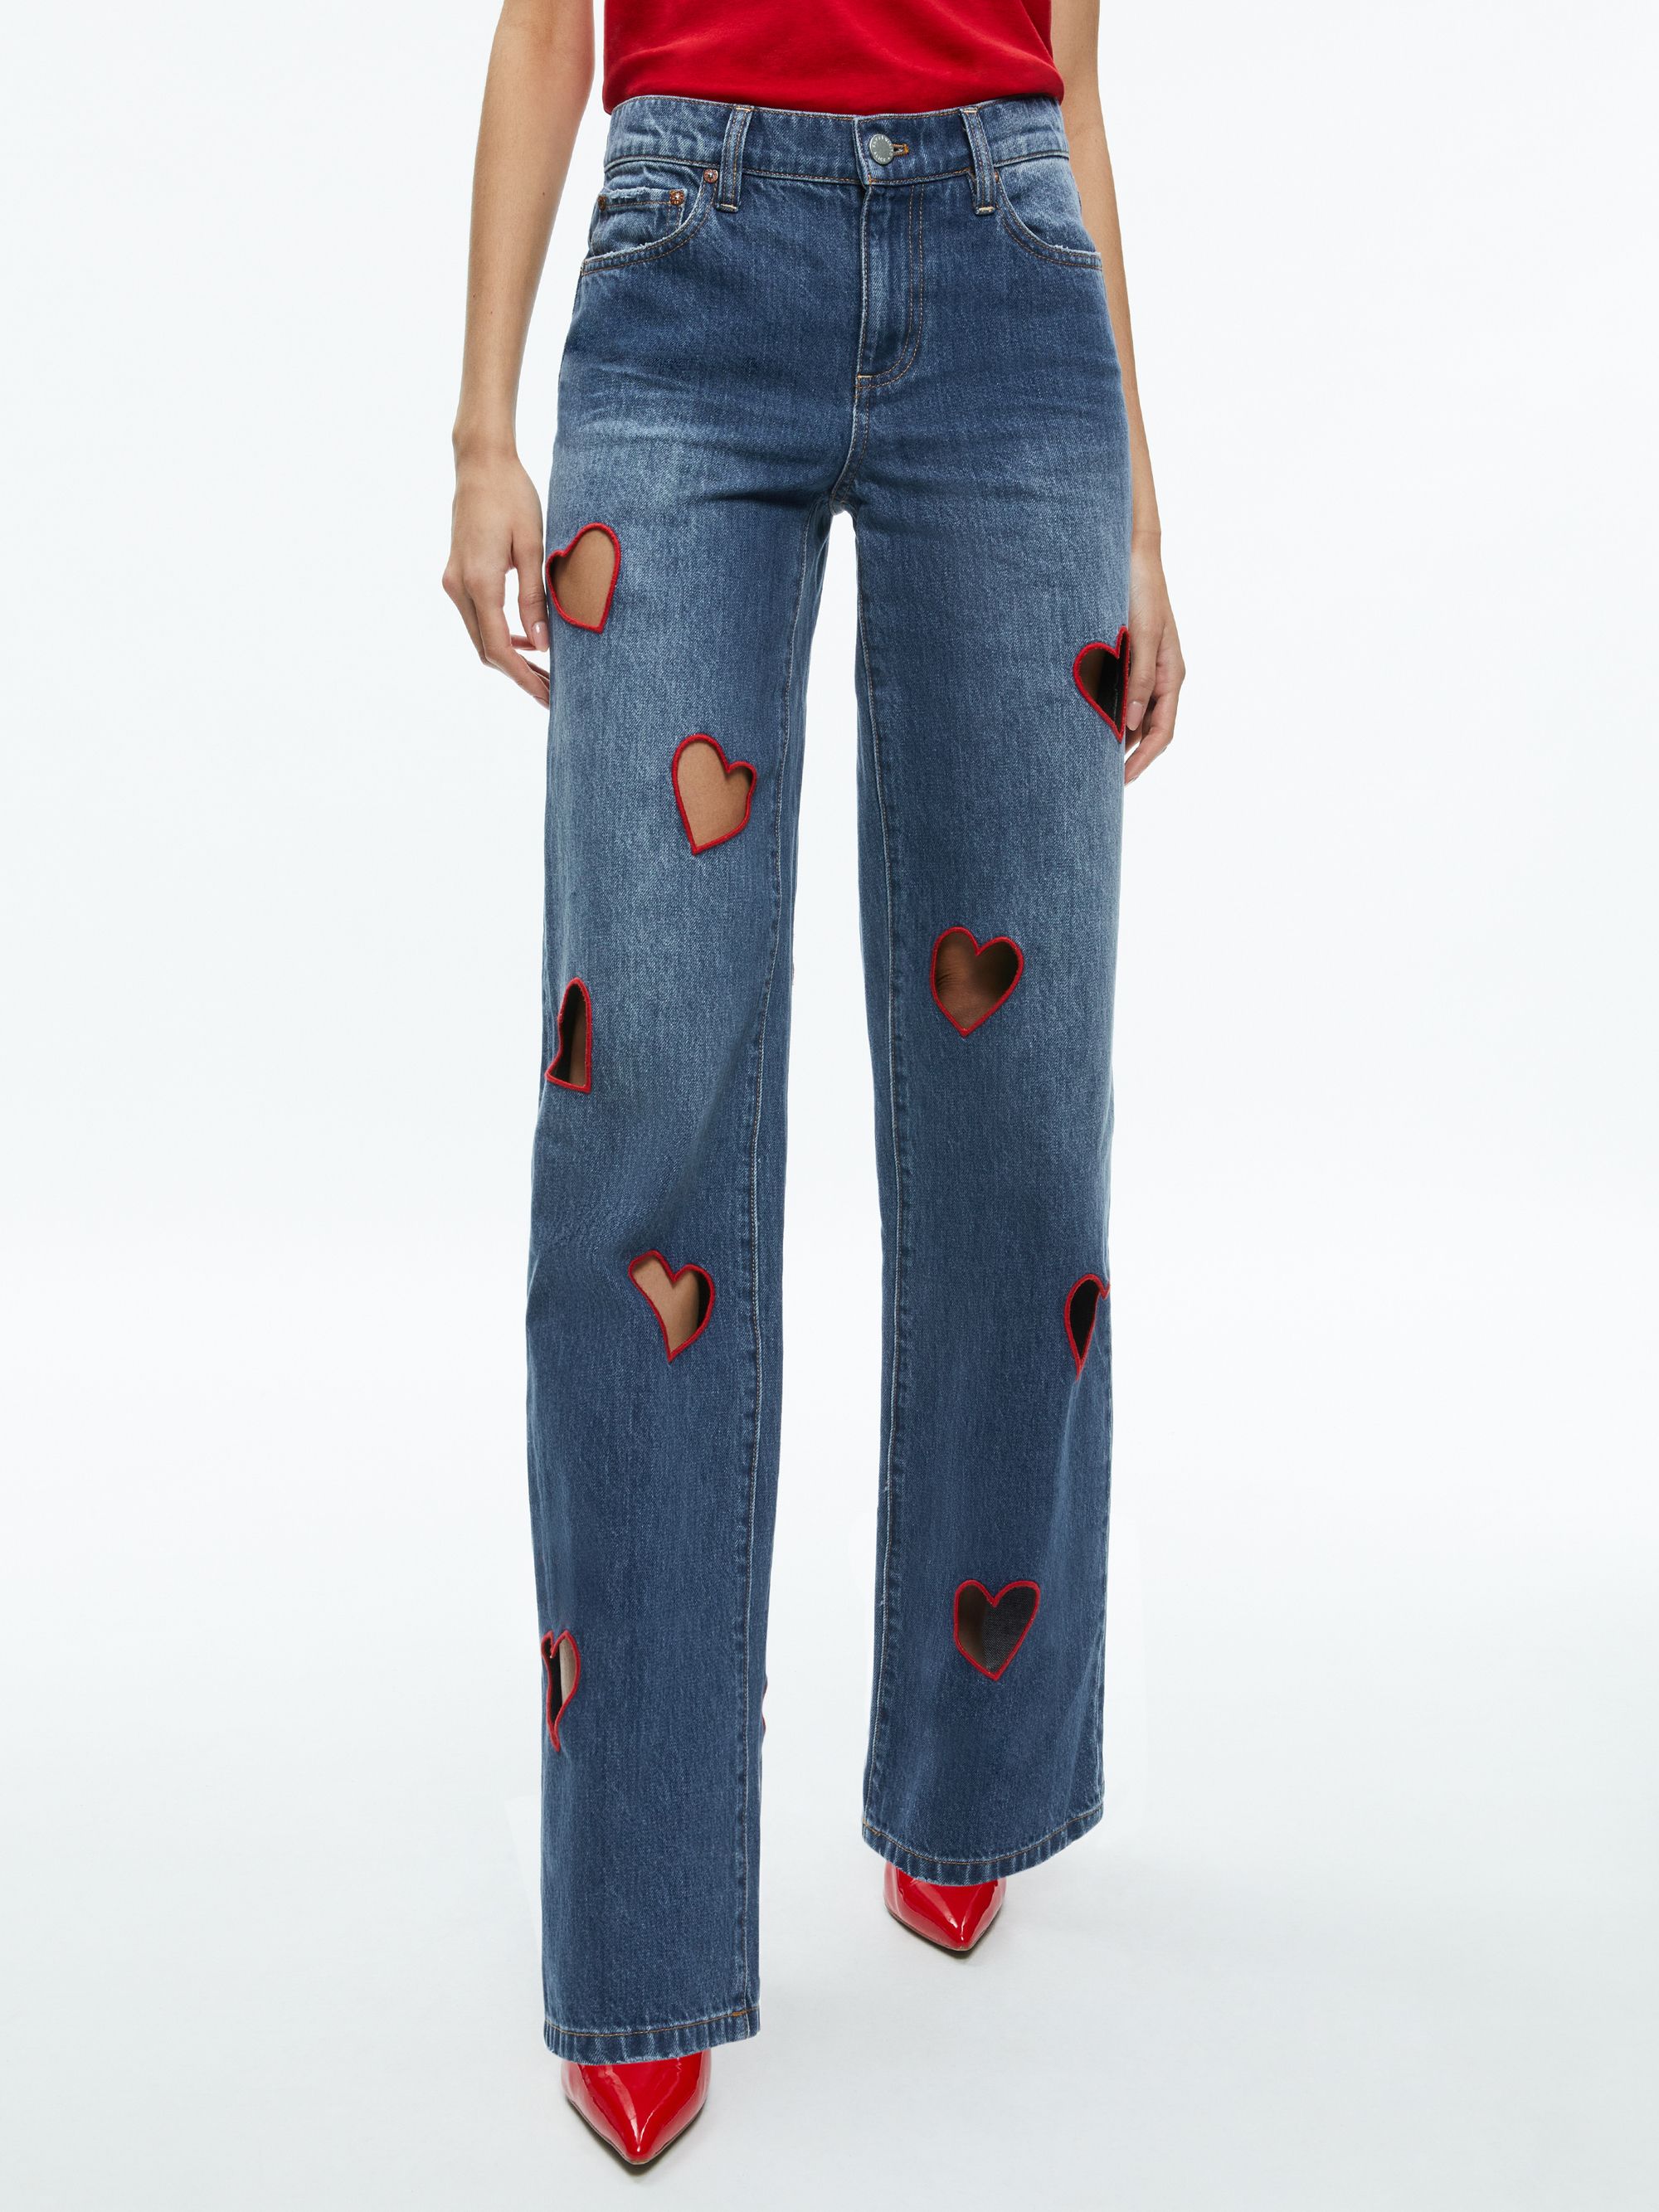 KARRIE EMBROIDERED HEART CUTOUT JEAN | Alice + Olivia